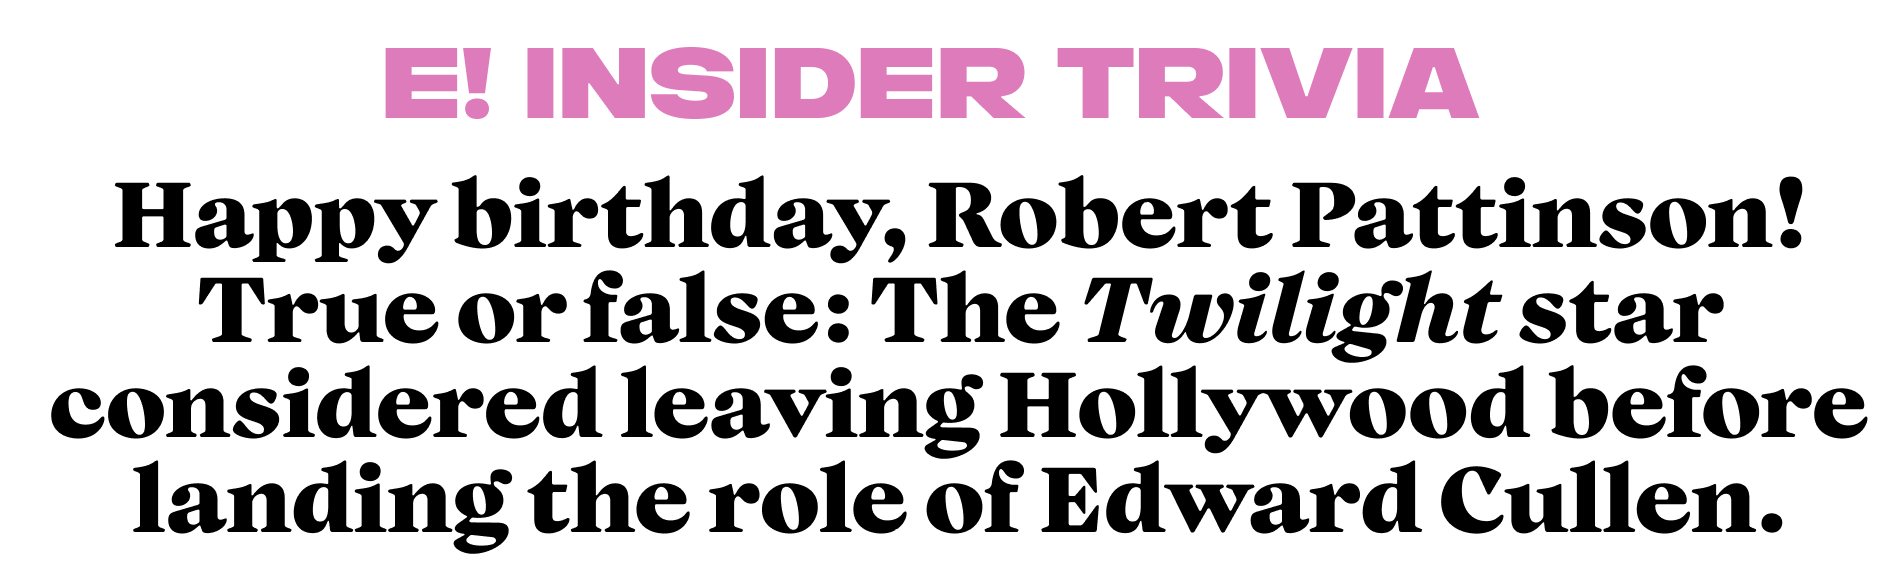 Happy birthday, Robert Pattinson! True or false: The Twilight star considered leaving Hollywood before landing the role of Edward Cullen.